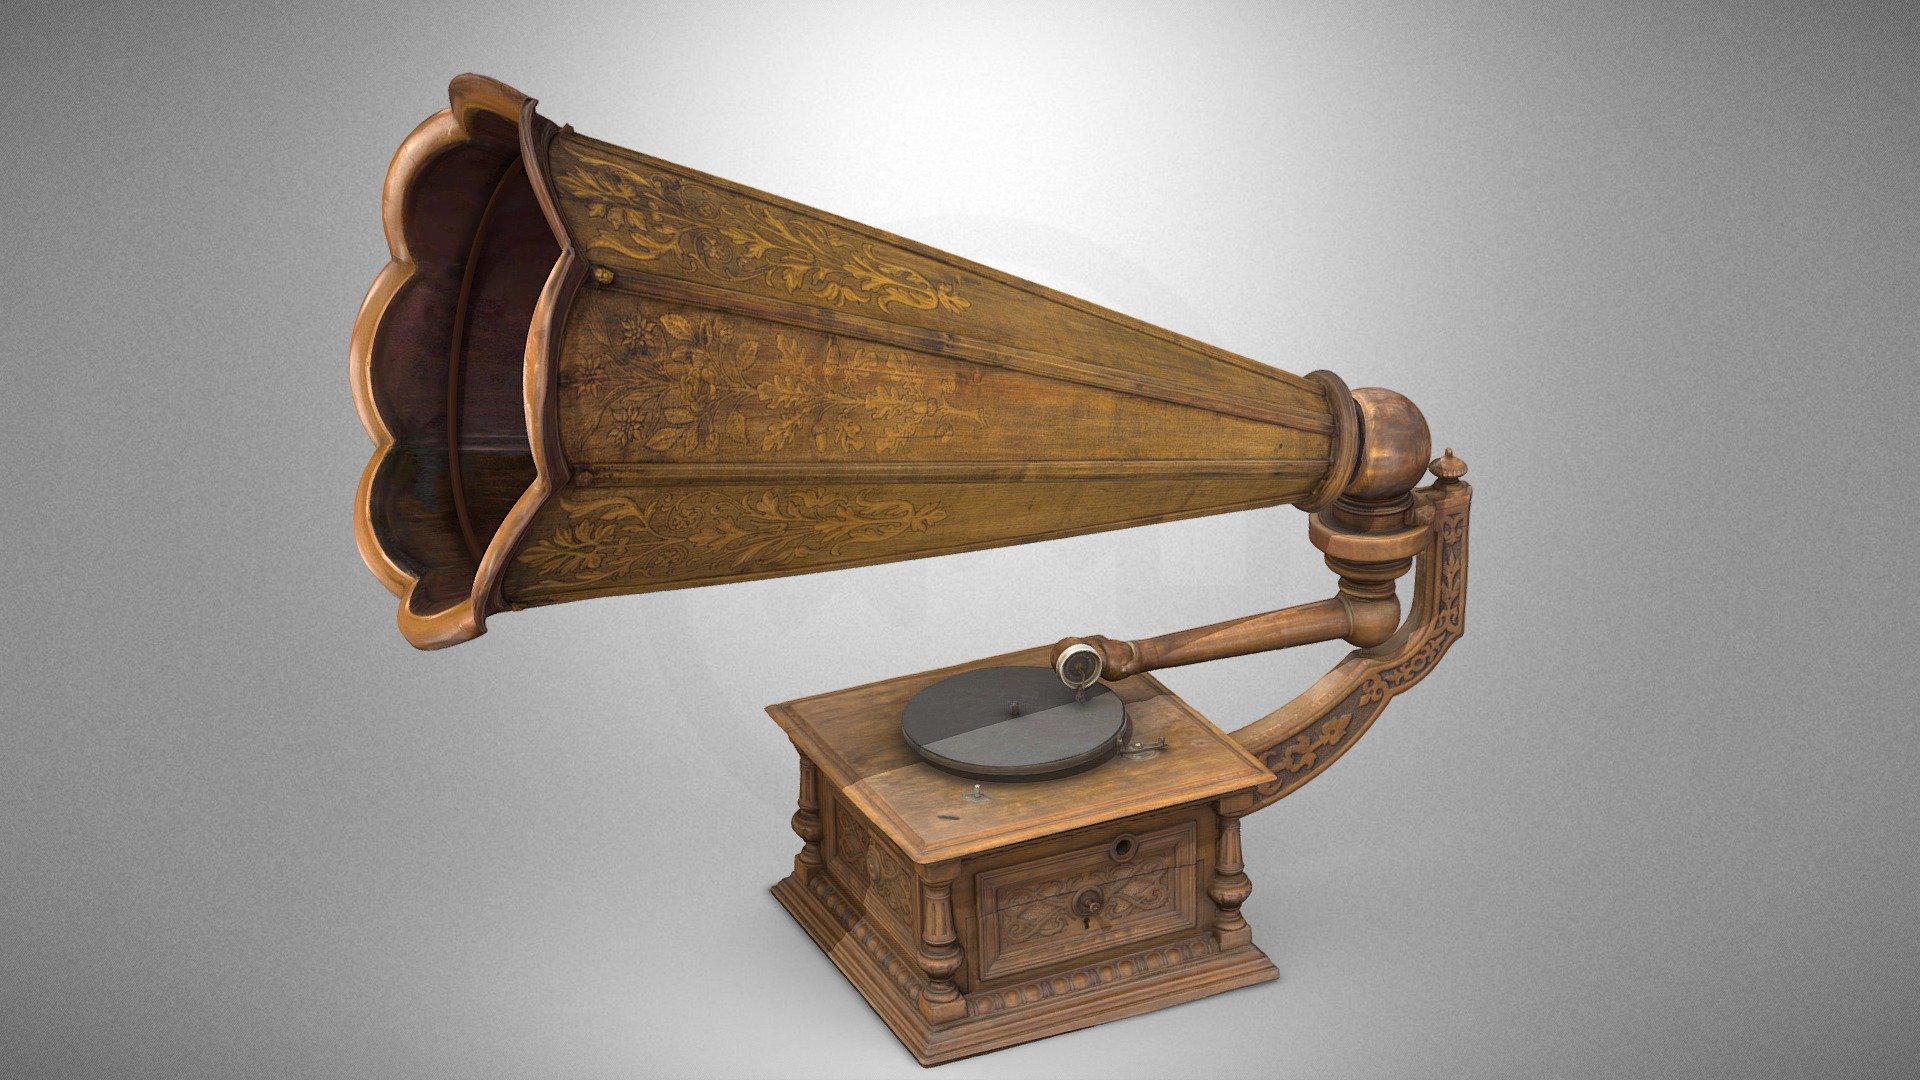 Gramophone with a wooden sound horn